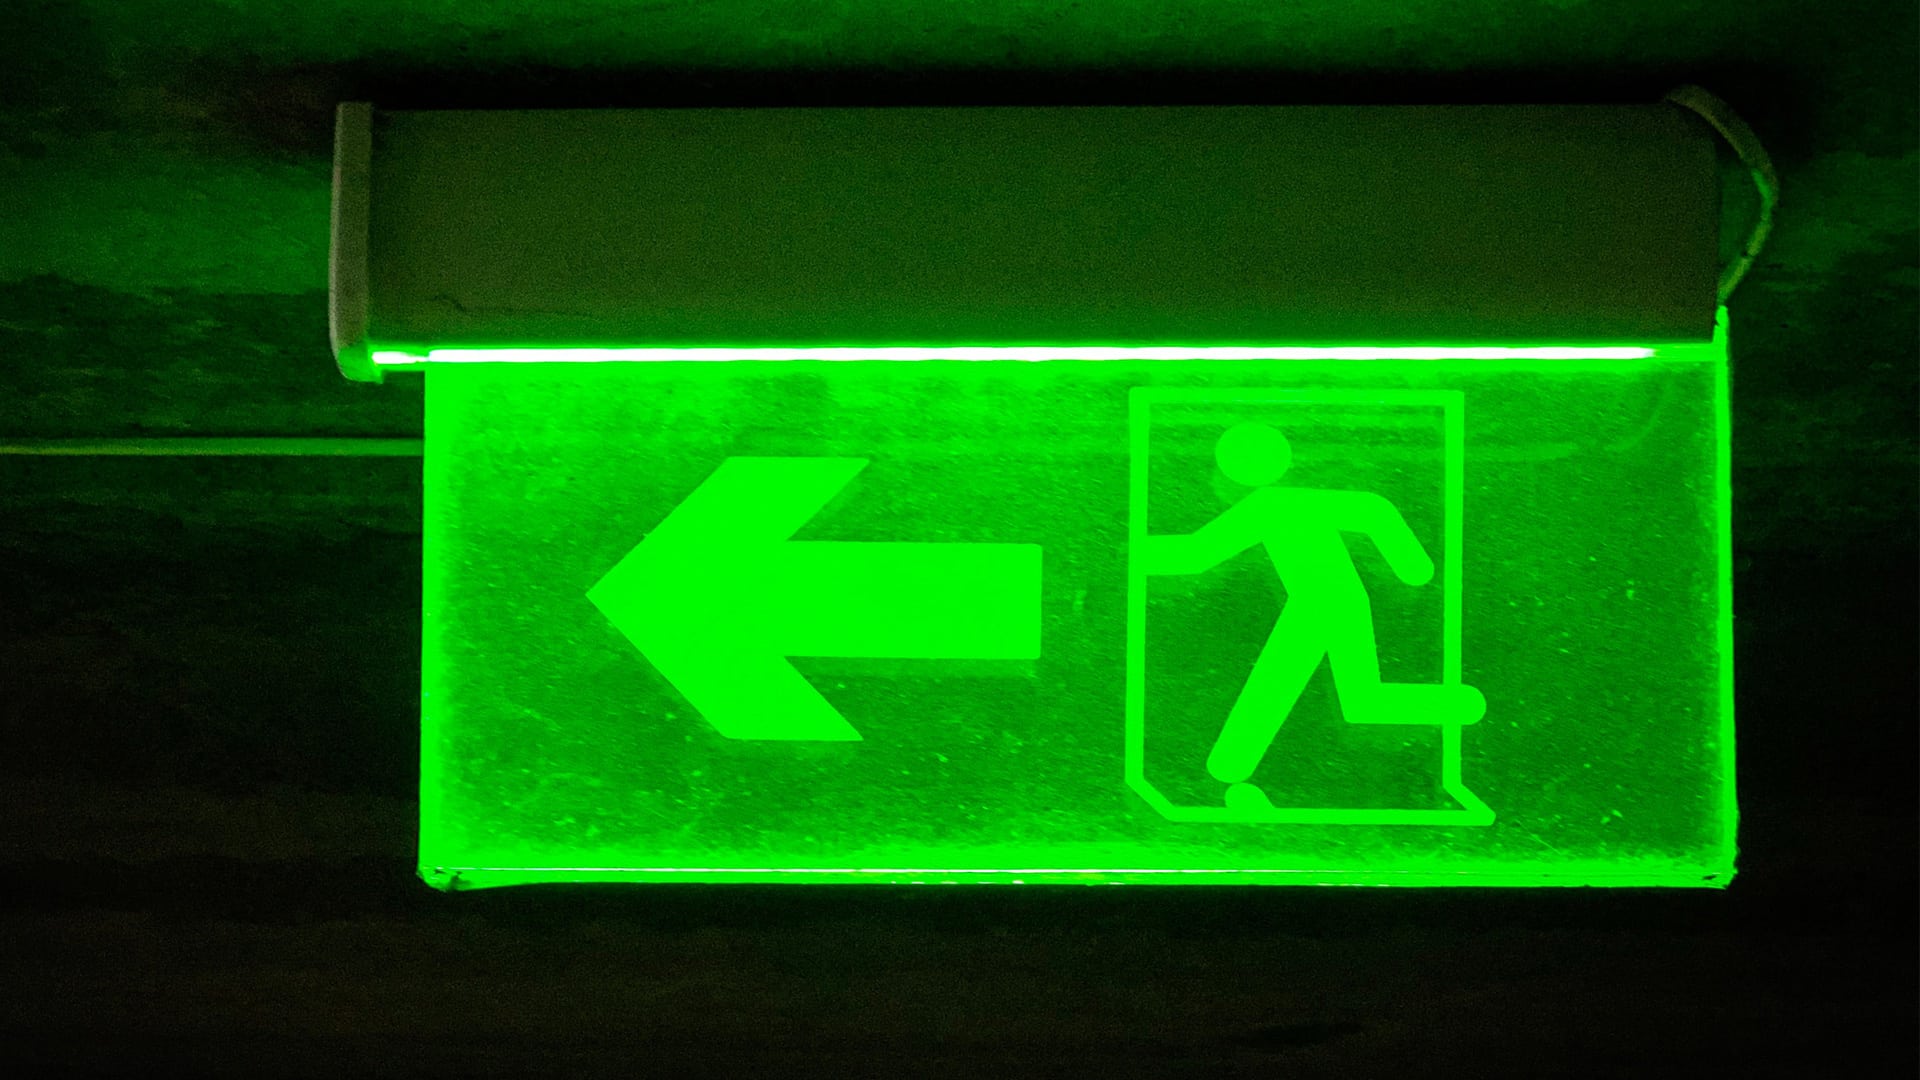 emergency exit sign